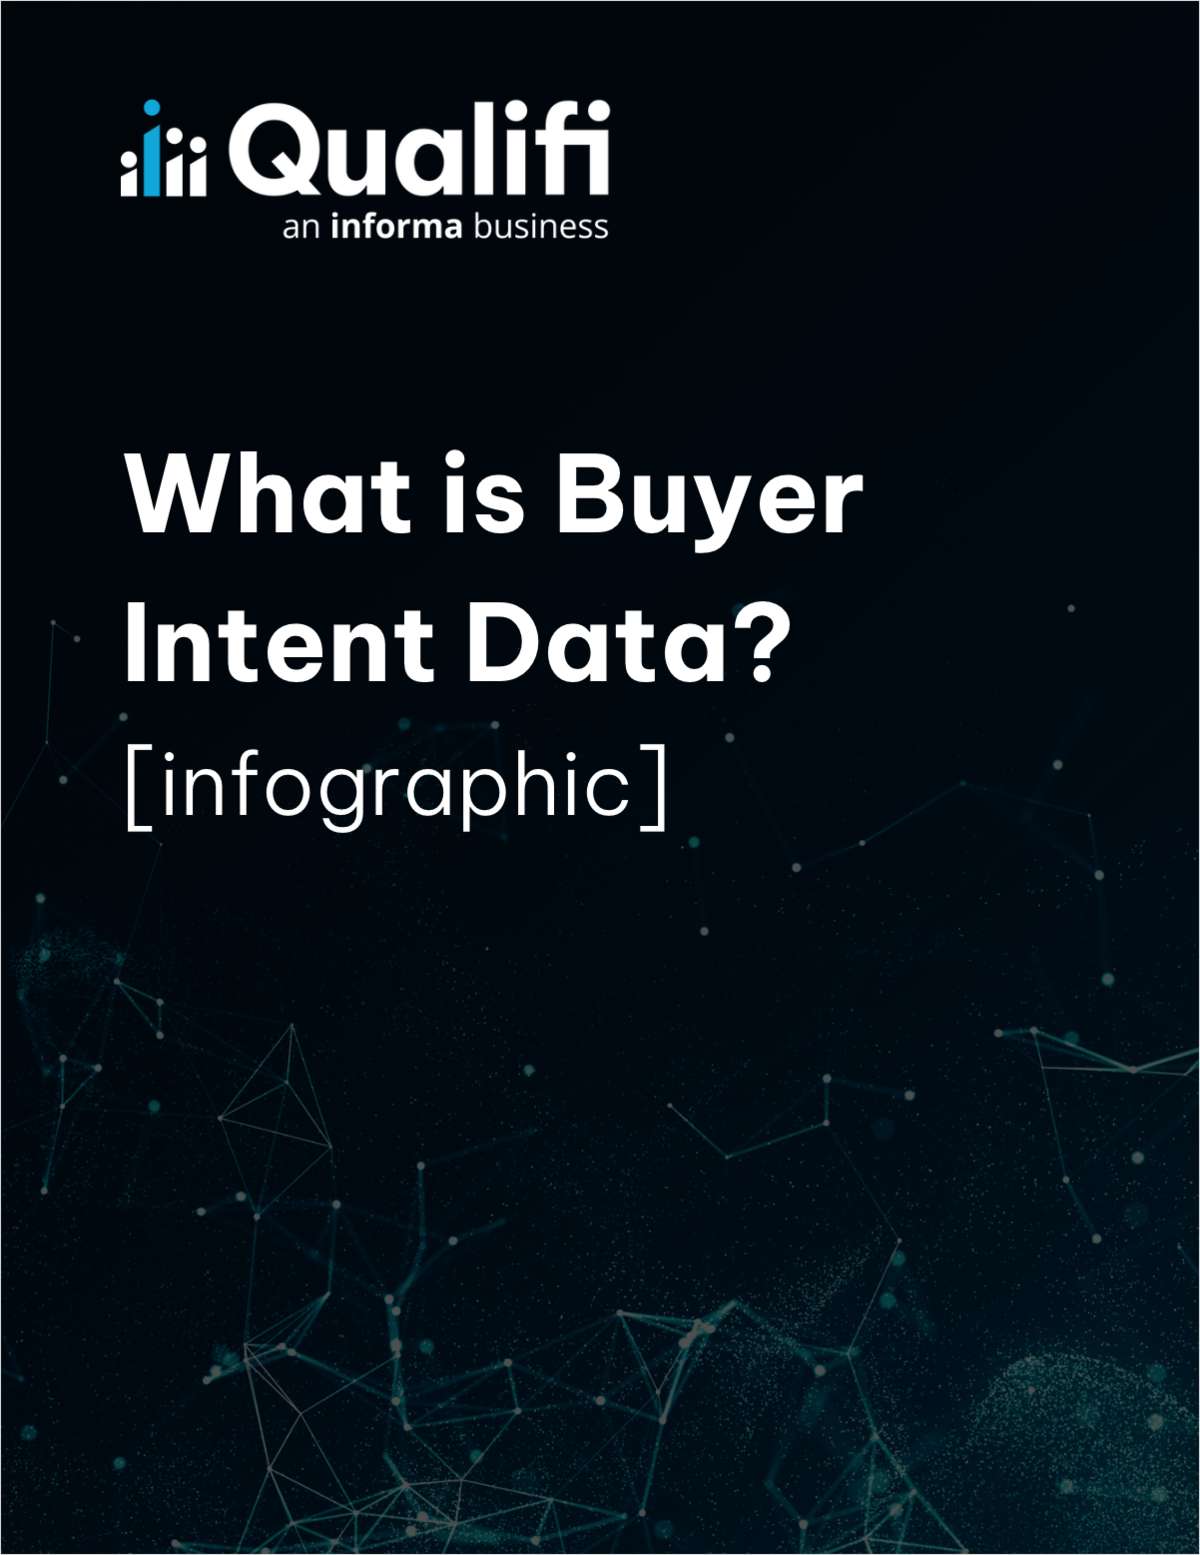 What is Buyer Intent Data?